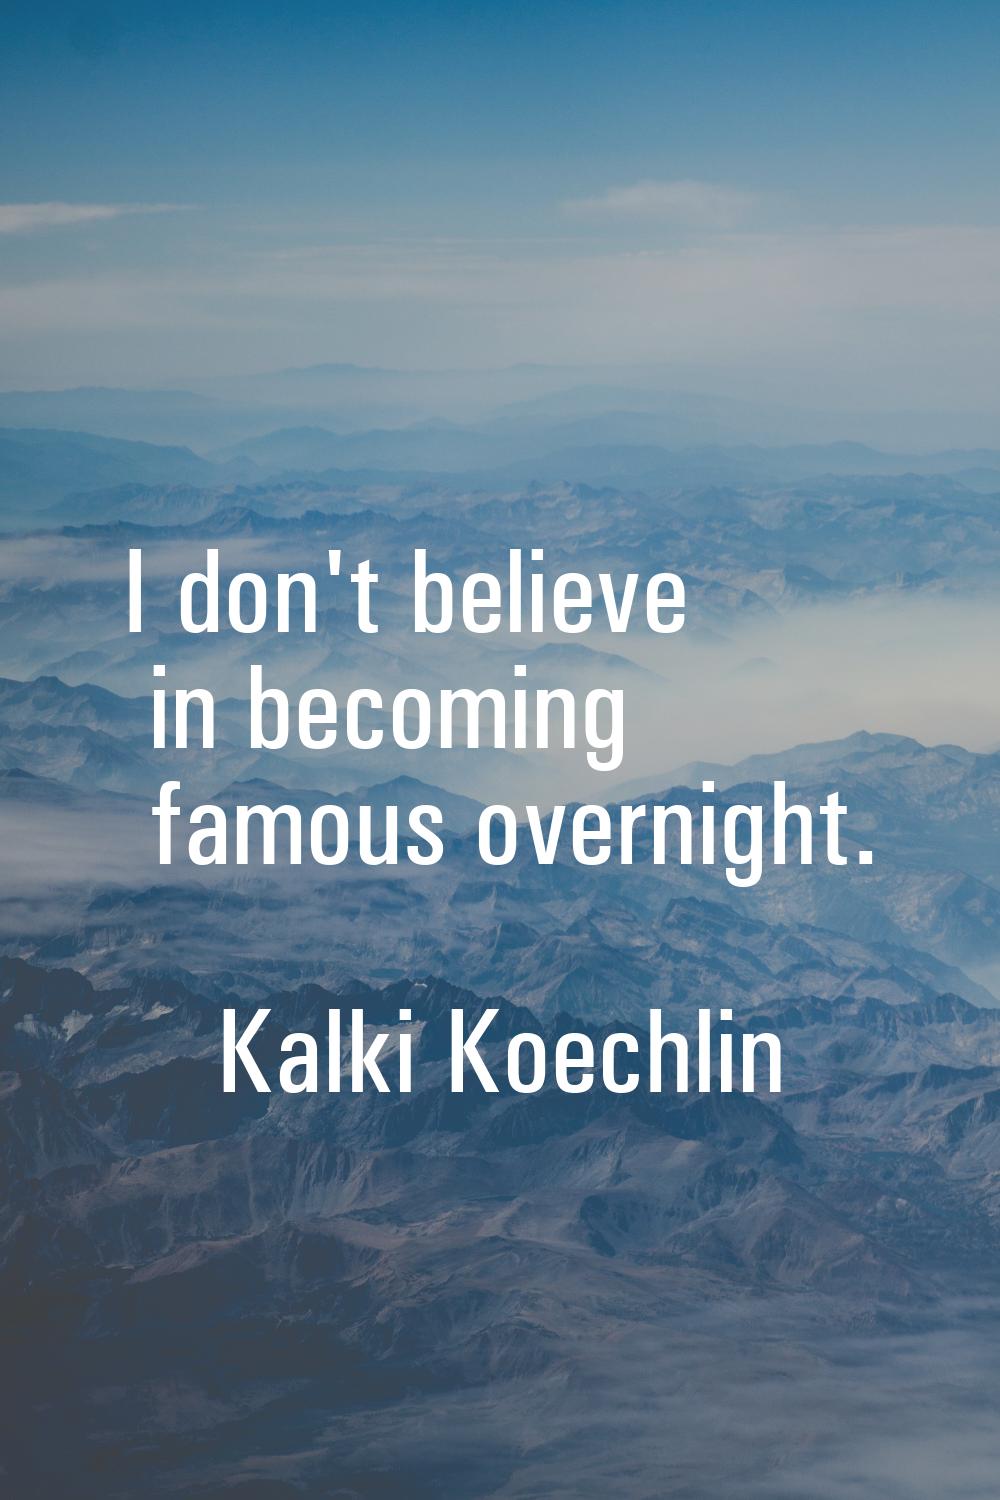 I don't believe in becoming famous overnight.